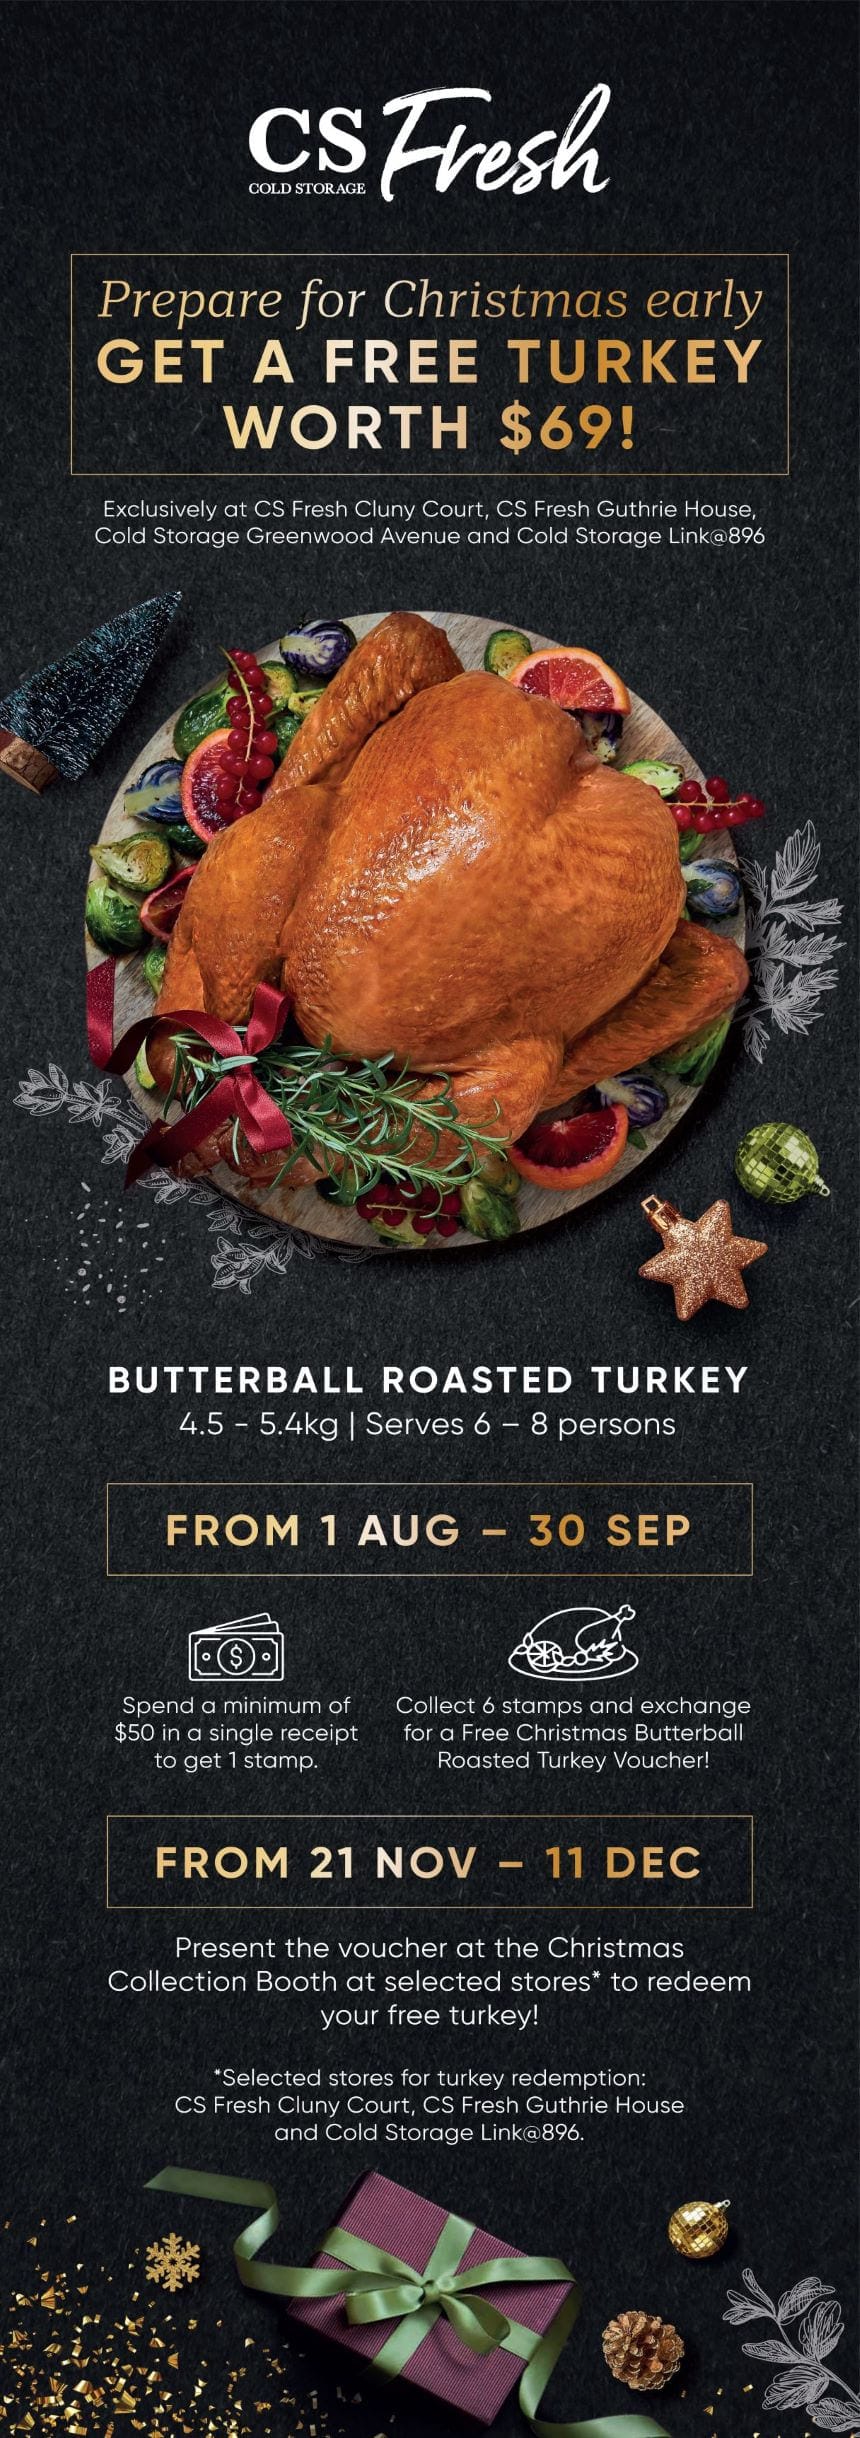 Prepare for Christmas Early – Free Turkey worth $69 (Till 30 Sep)